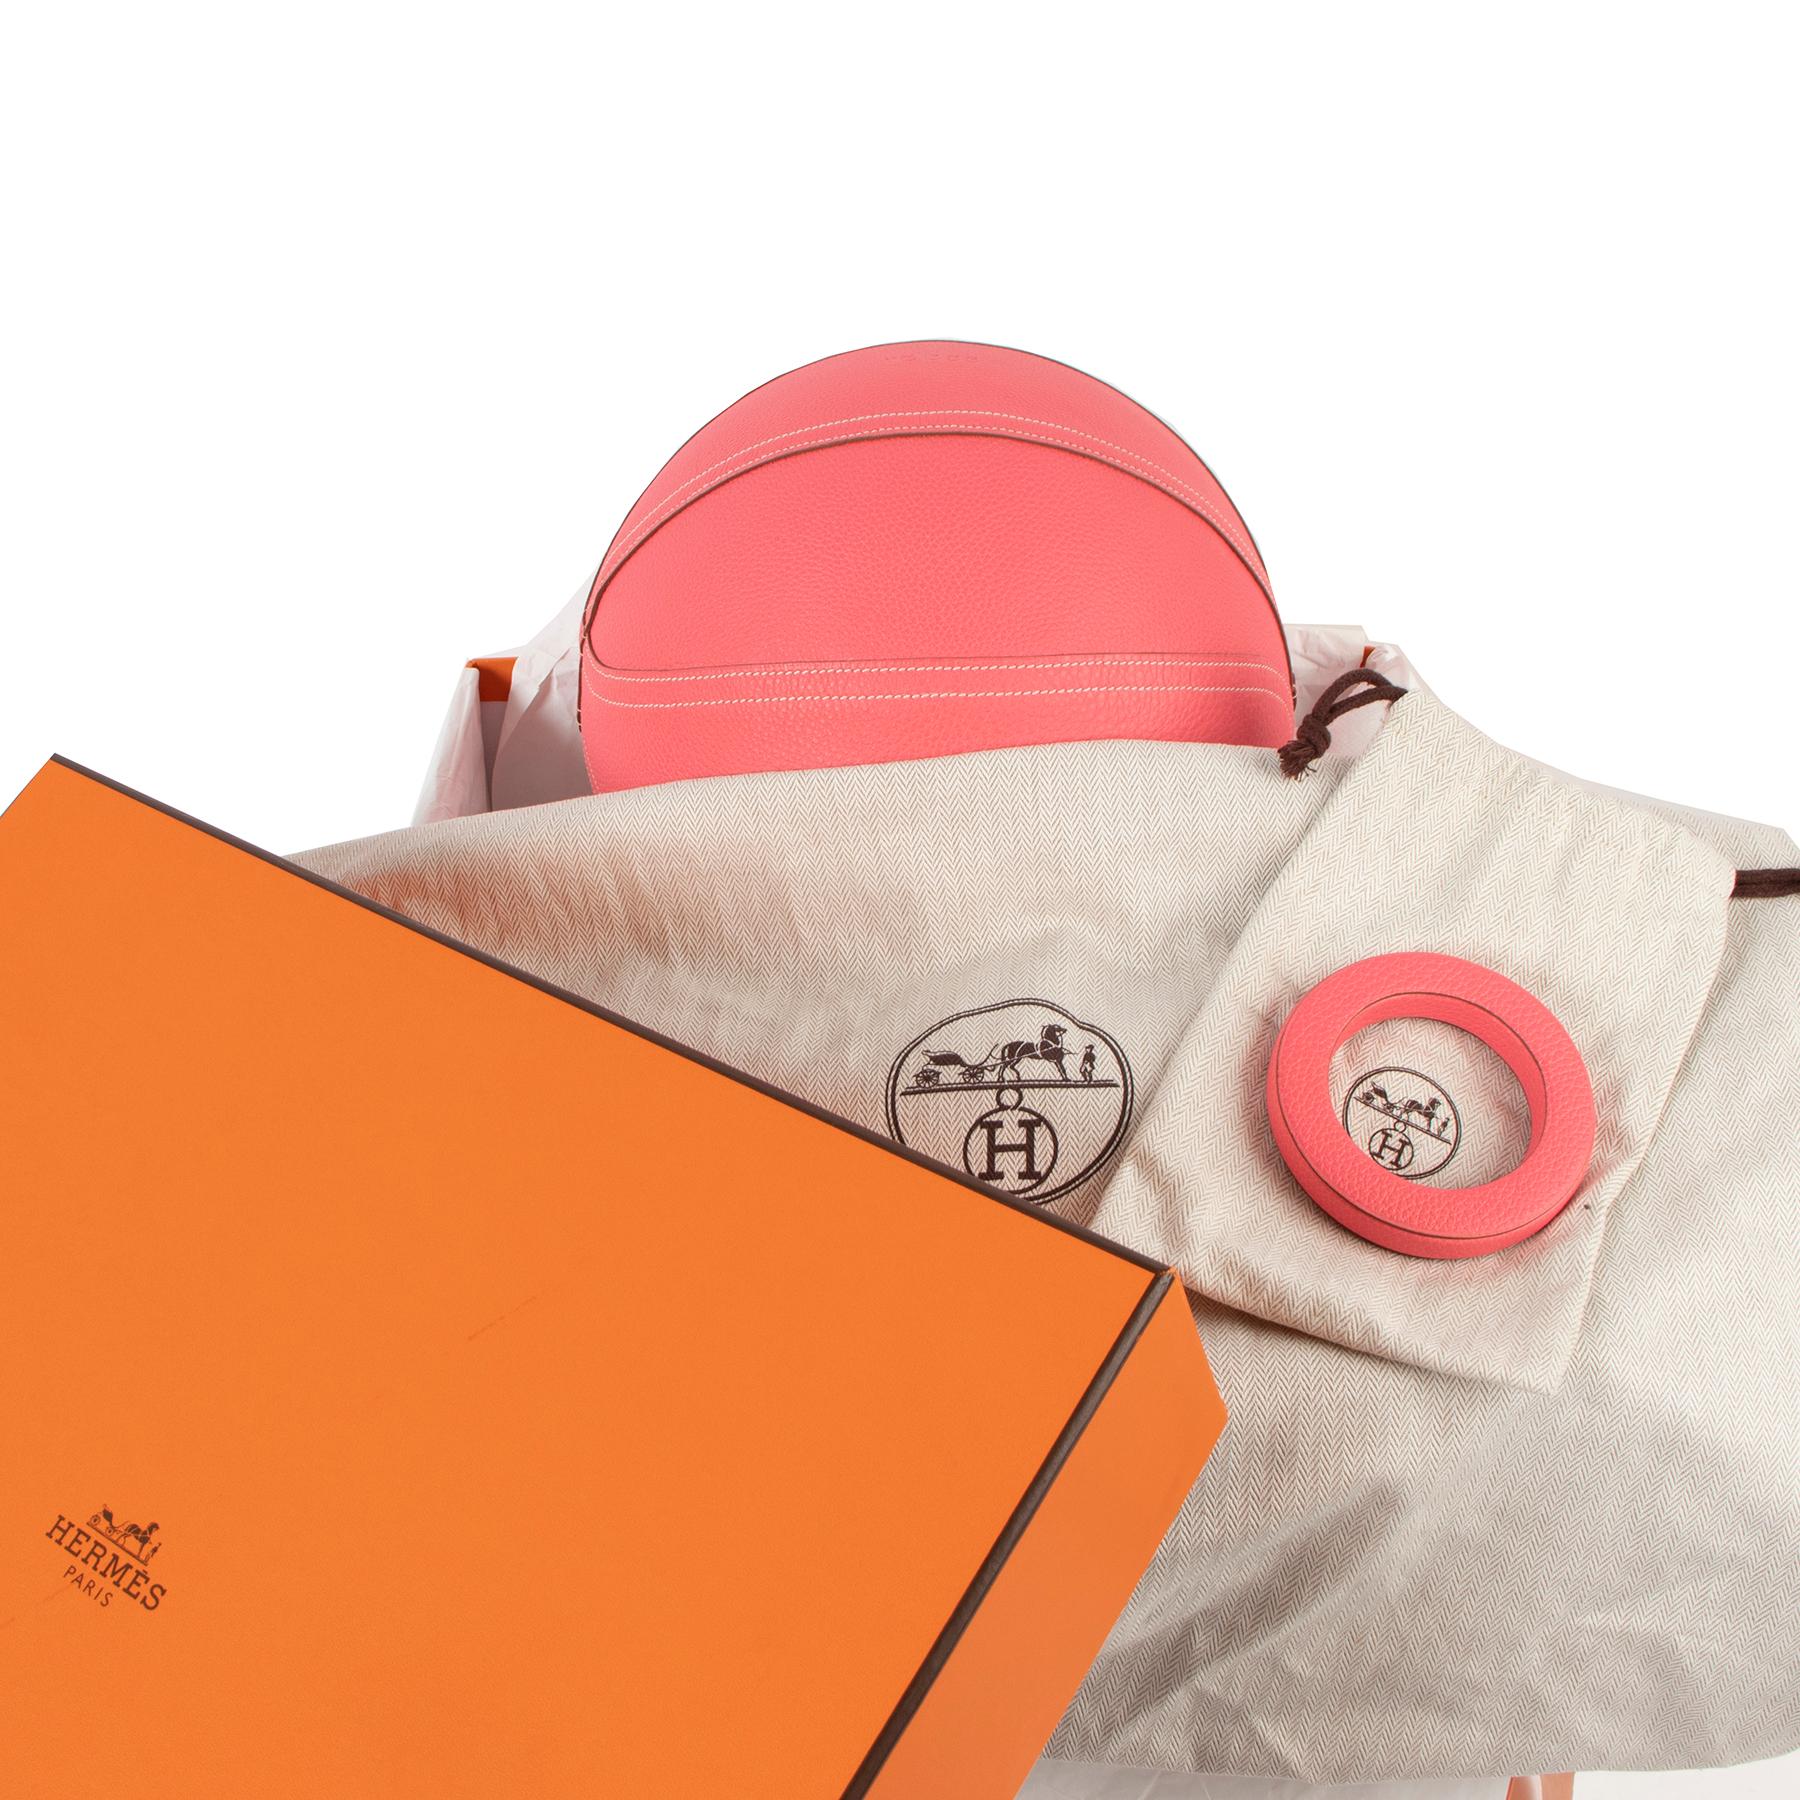 Hermès Horizon Special Order Rose Confetti Togo Basketball

One-of-a-kind in the world, this Hermès basketball has been special ordered and is extremely hard to get.

Made from supple Togo leather in Rose Confetti, the basketball has been handmade